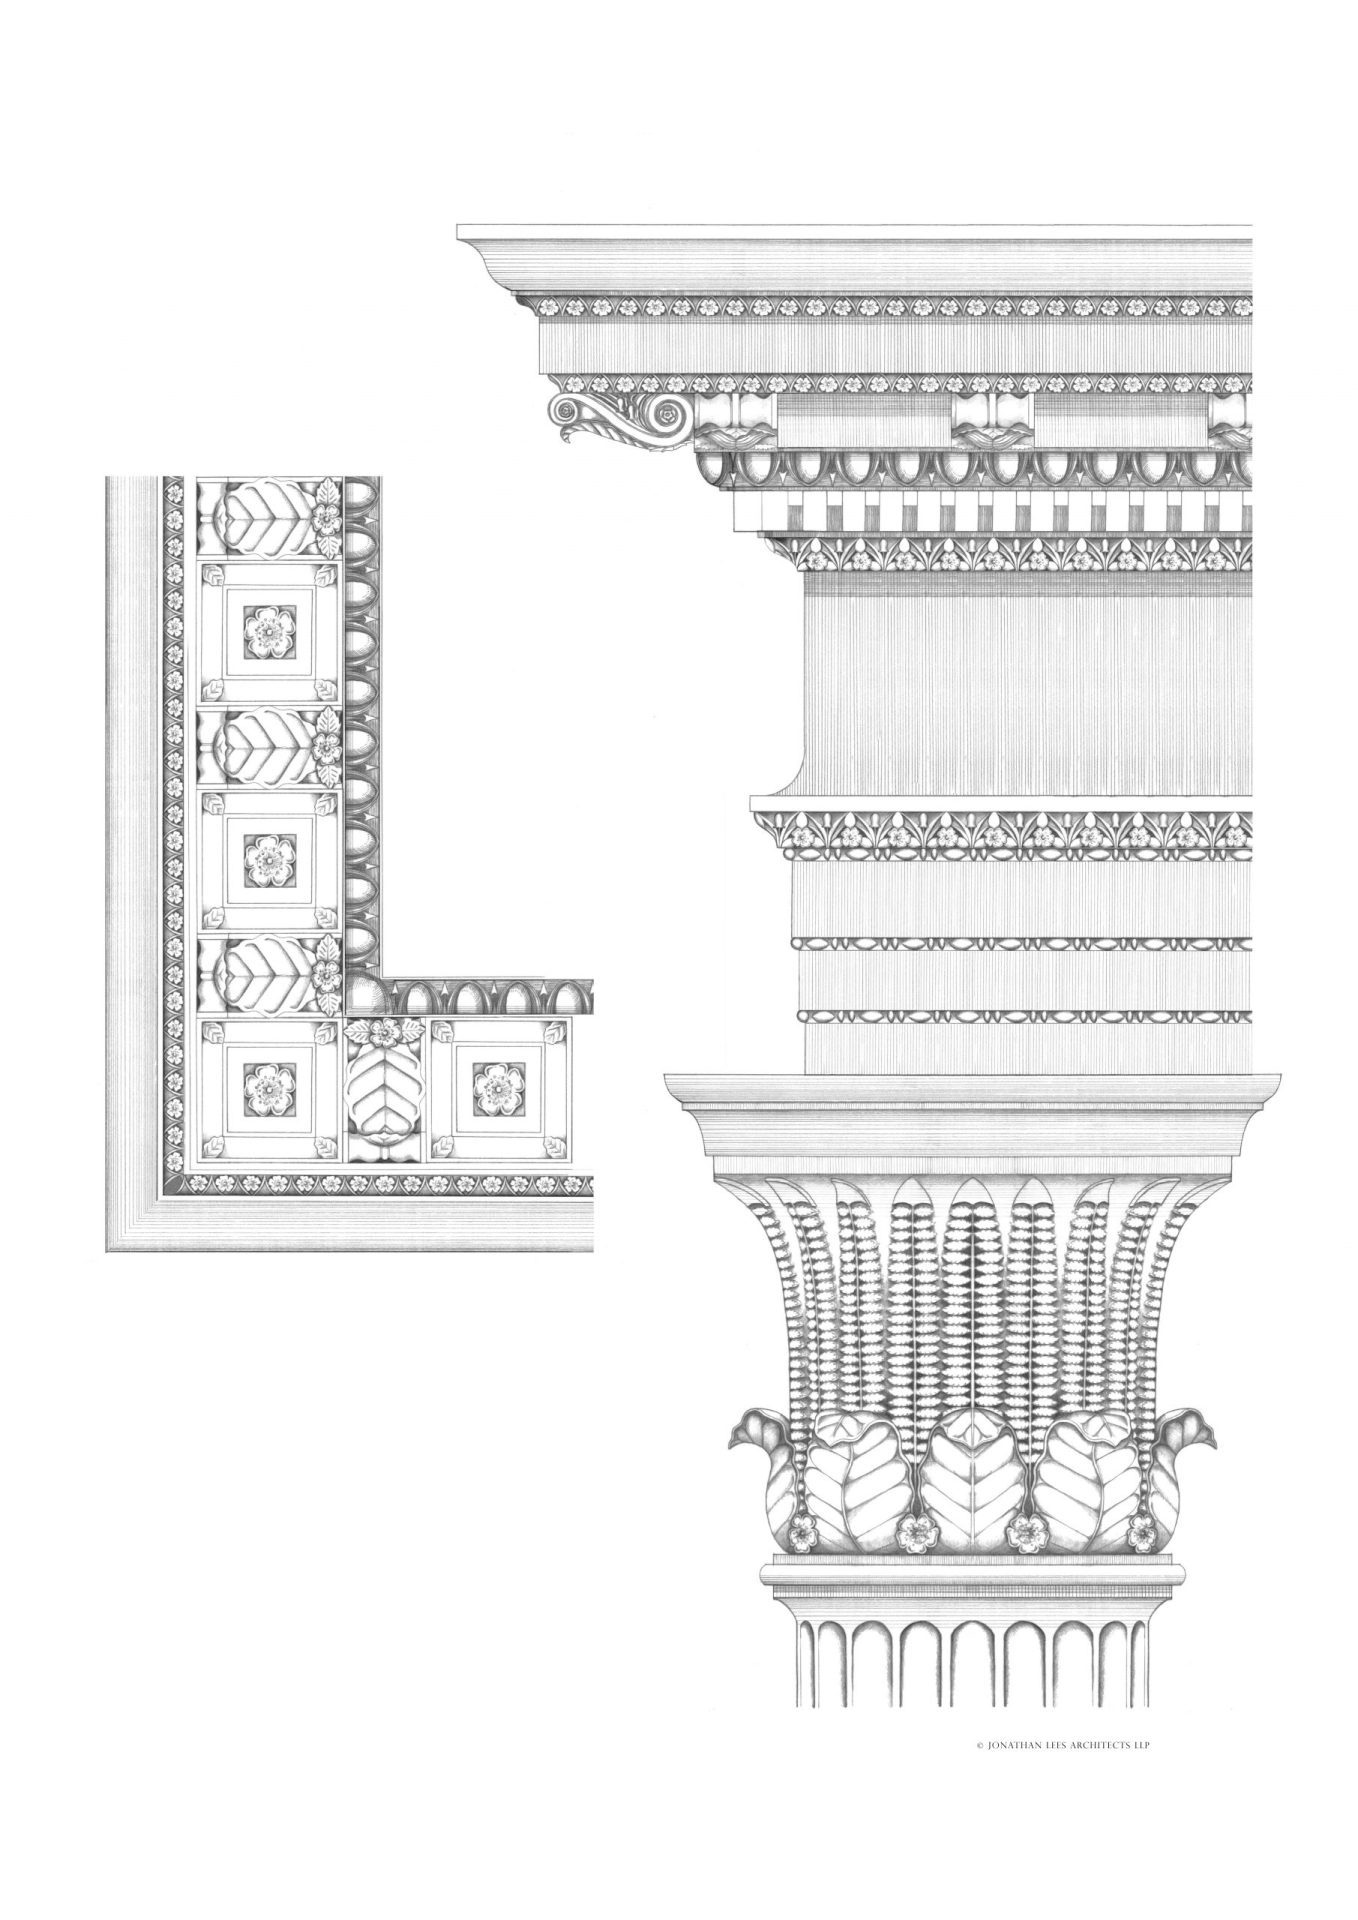 Ornate Classical order pencil design by Architect